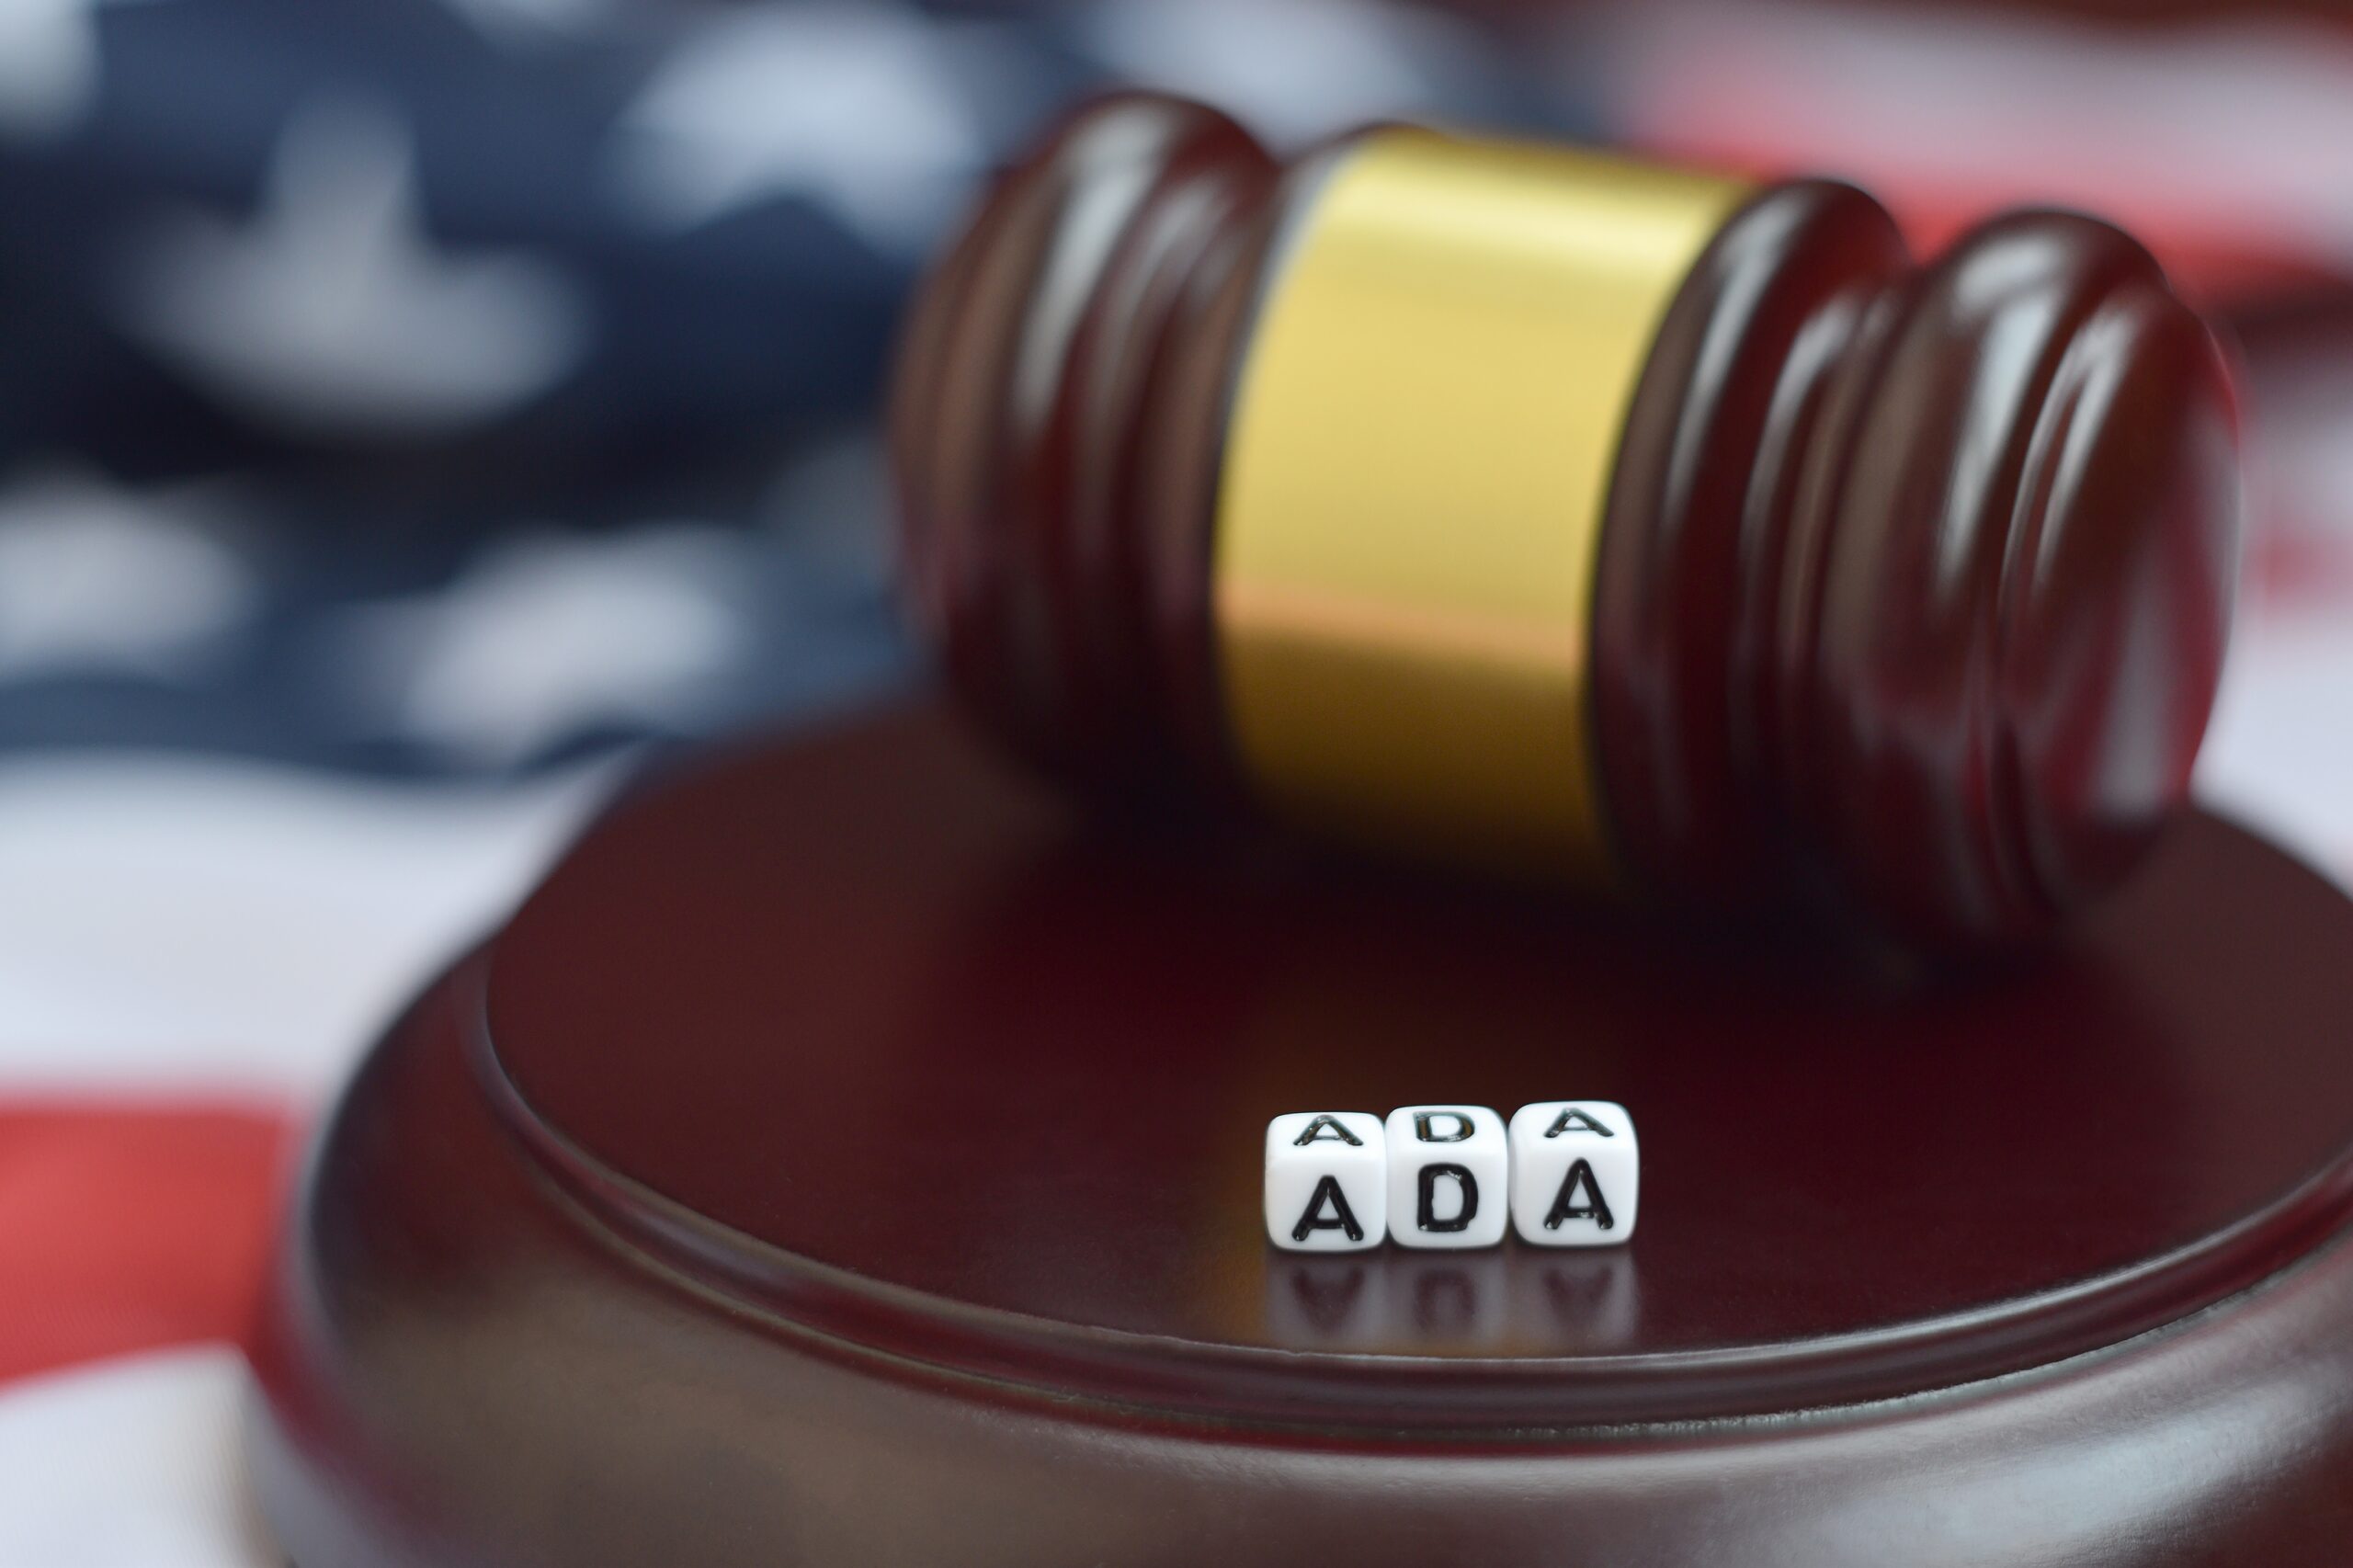 Justice mallet and ADA Americans with disabilities act